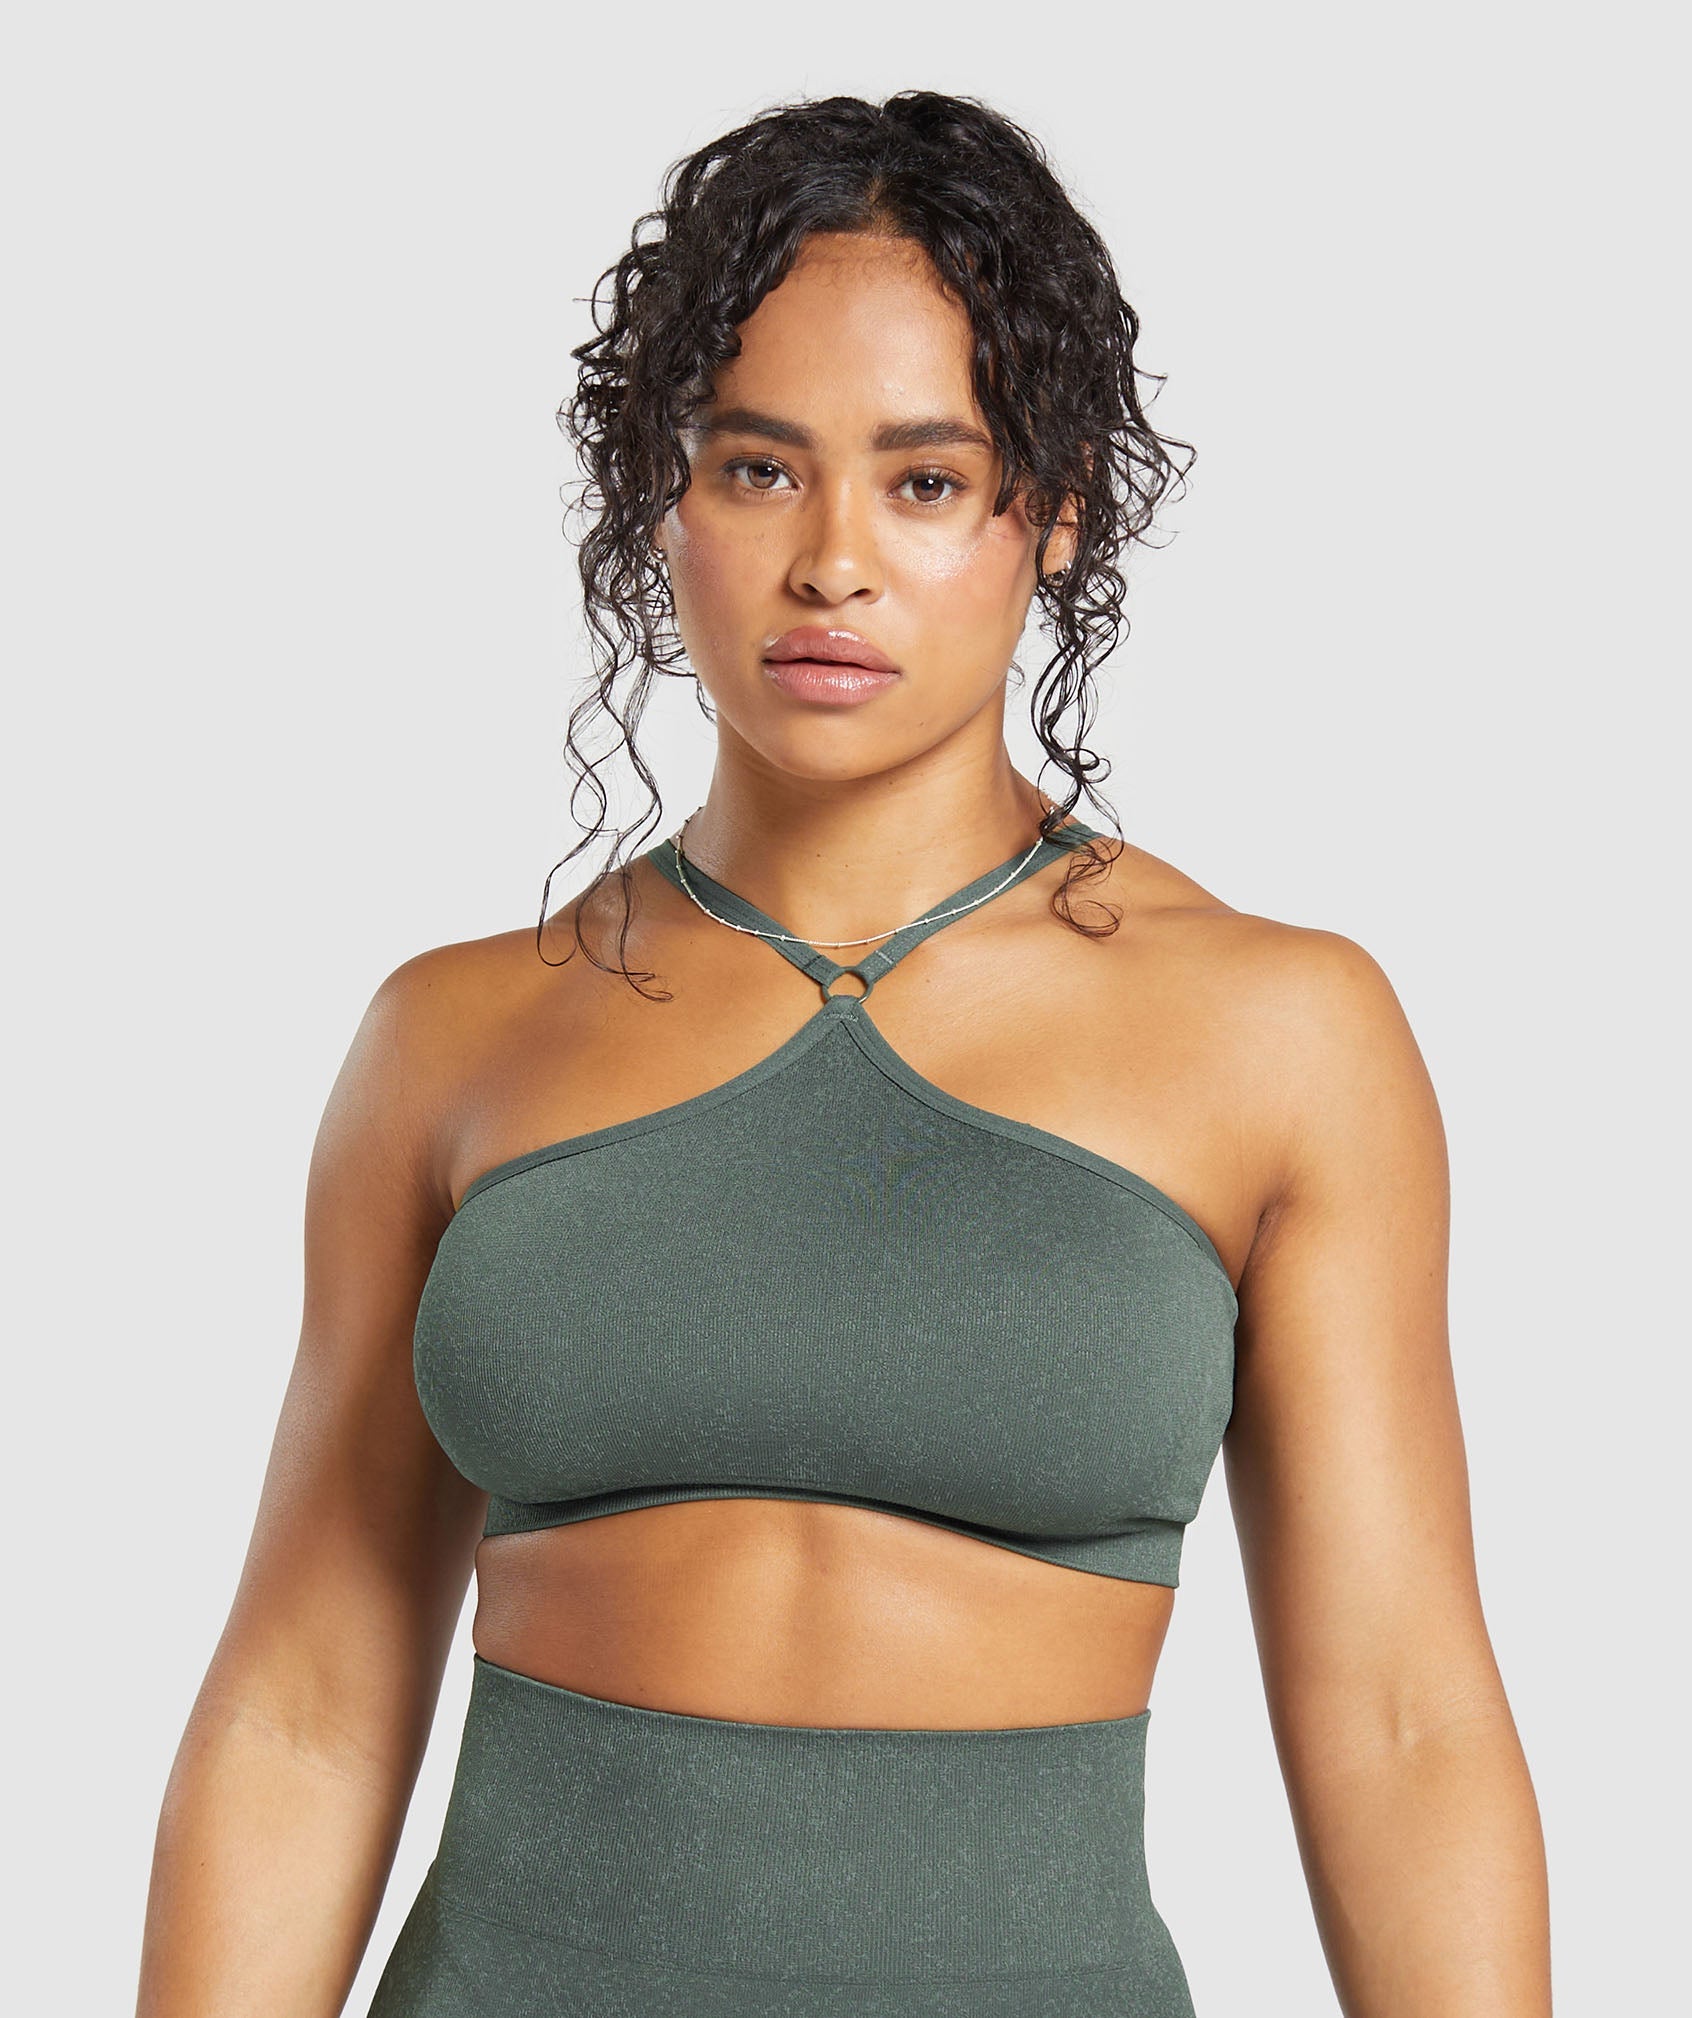 Adapt Fleck Seamless Halterneck Bralette in  is out of stock